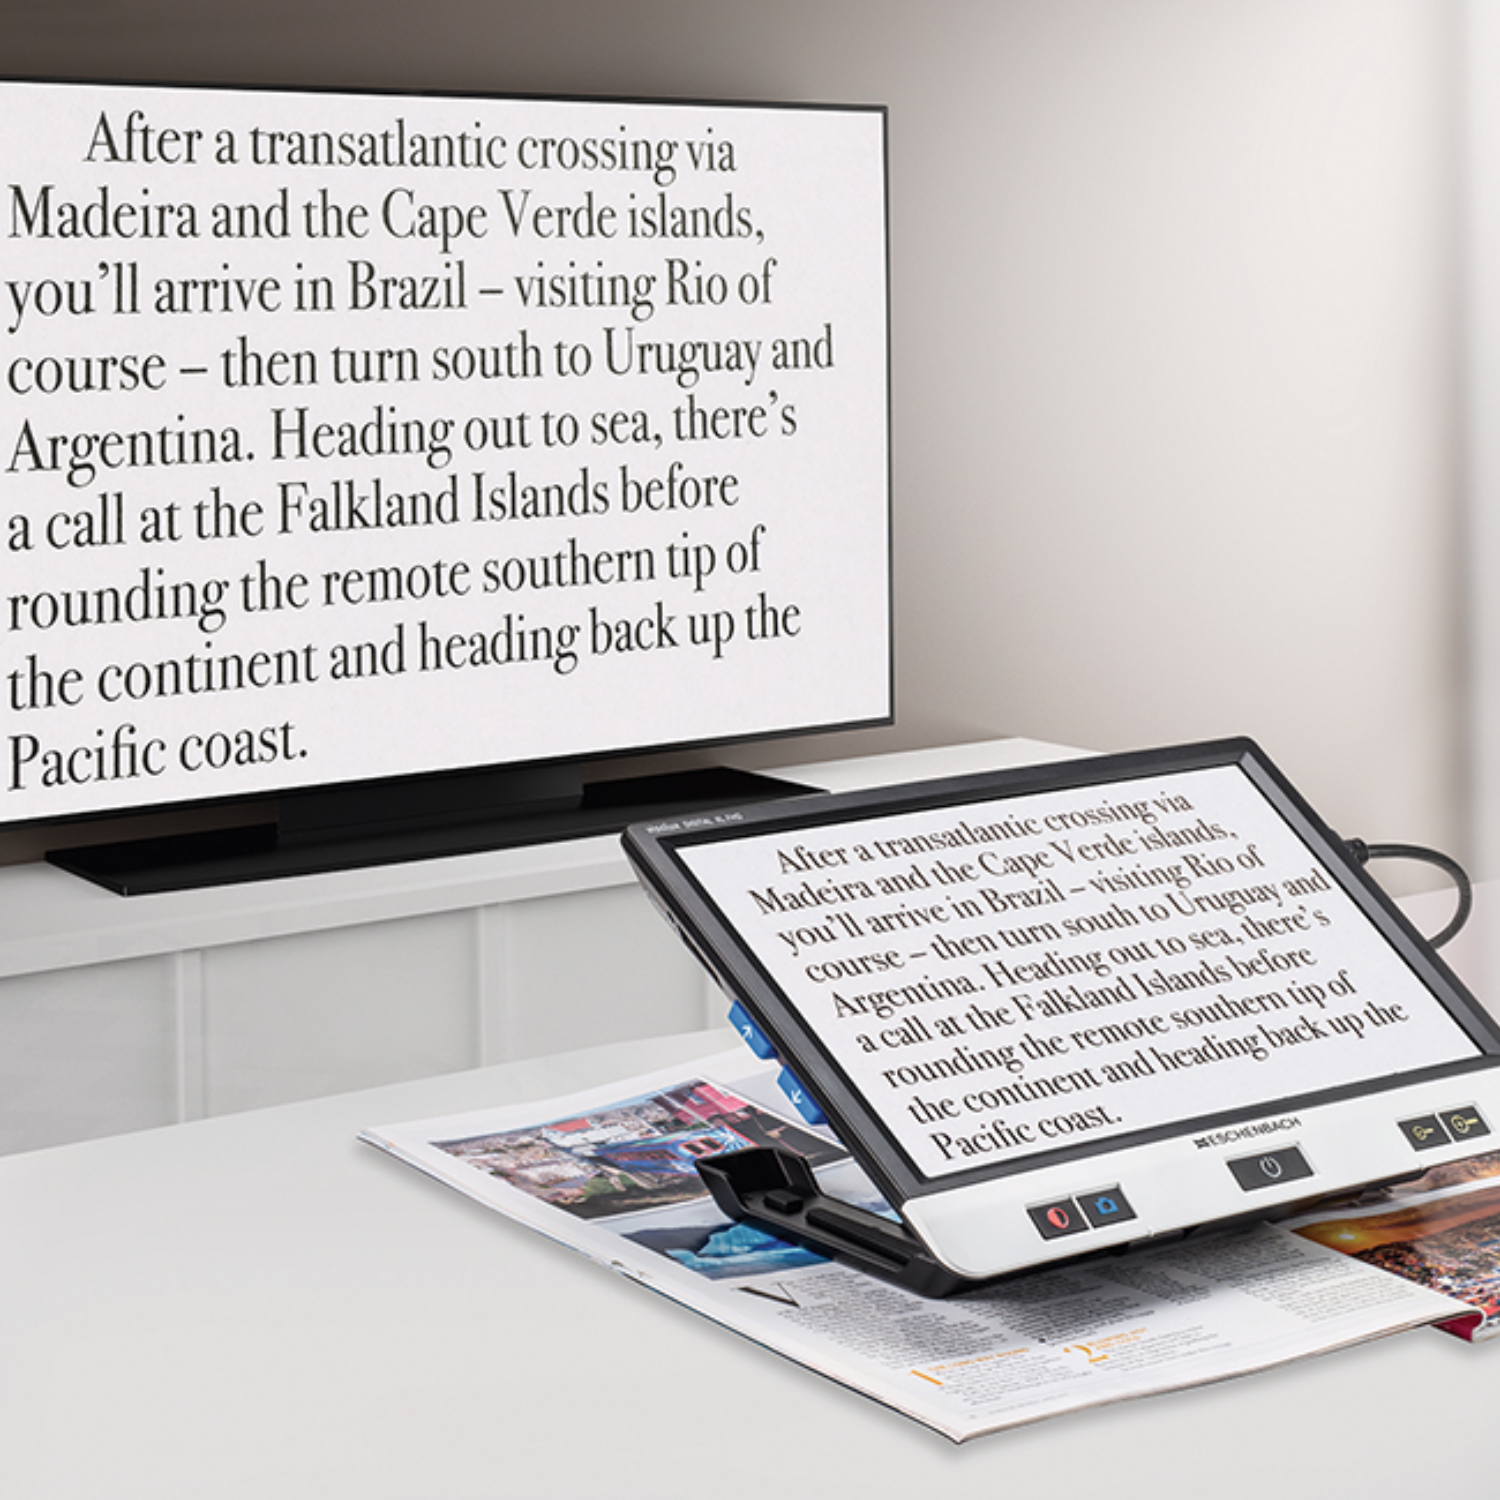 Image of the Visolux Digital XL FHD 12" portable video magnifier showing it magnifying text on a table